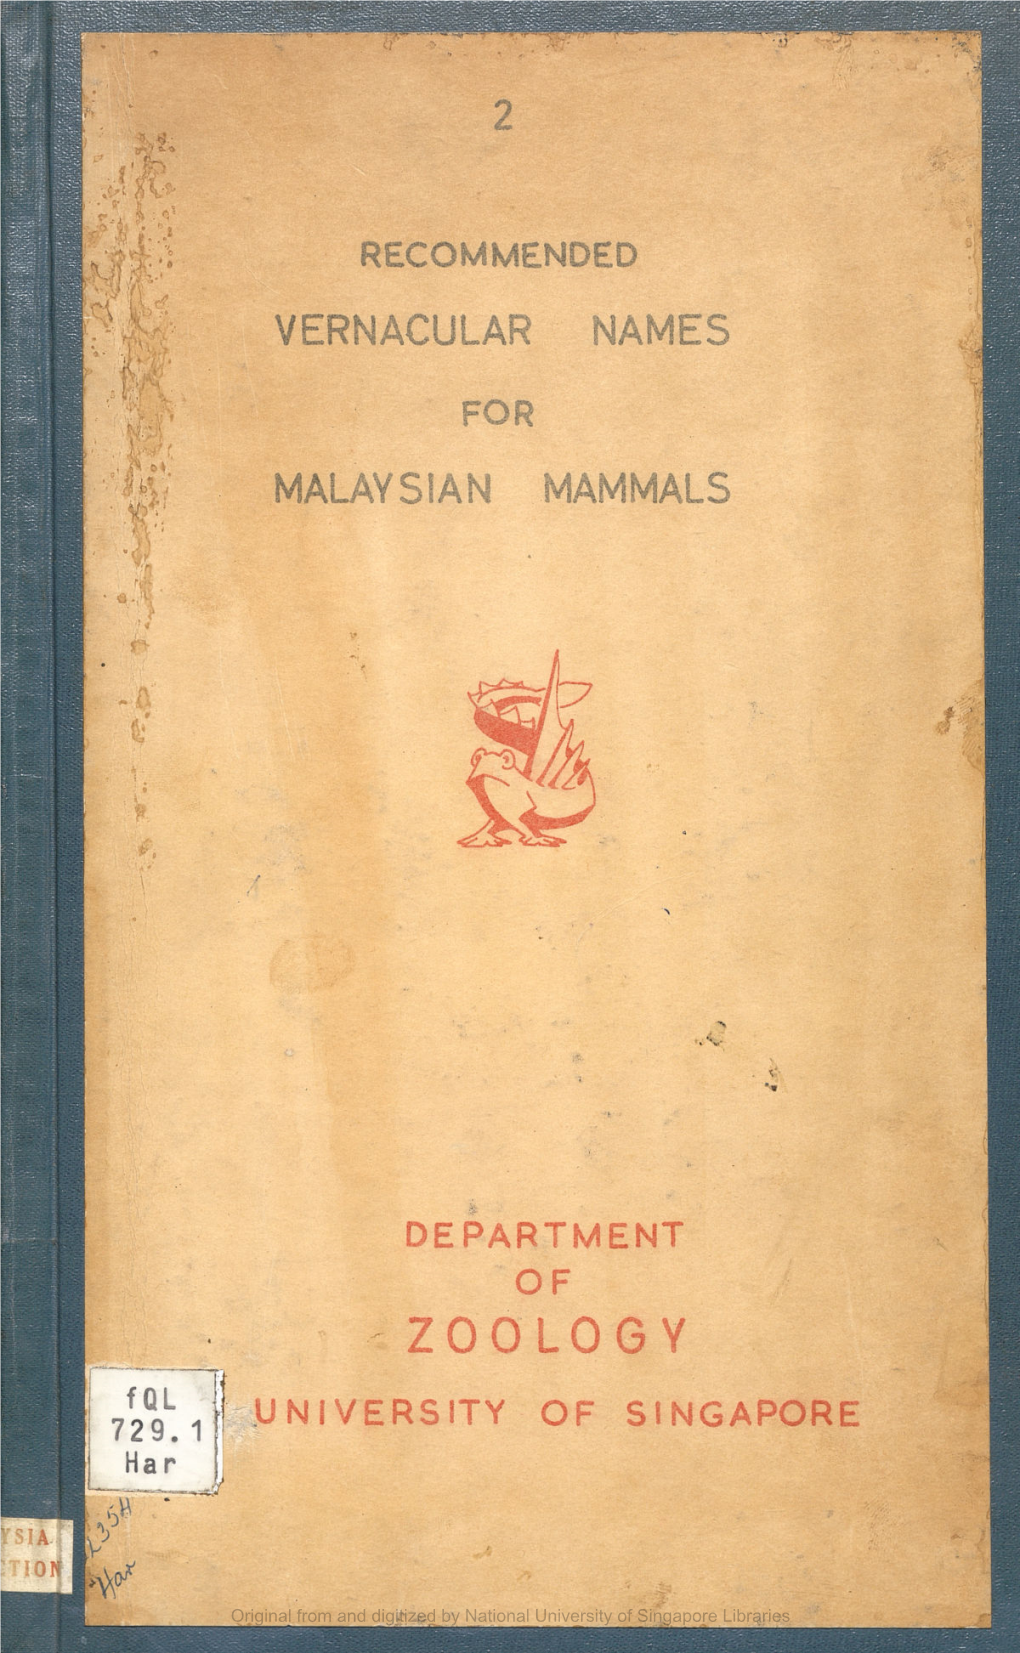 Recommended Vernacular Names for Malaysian Mammals